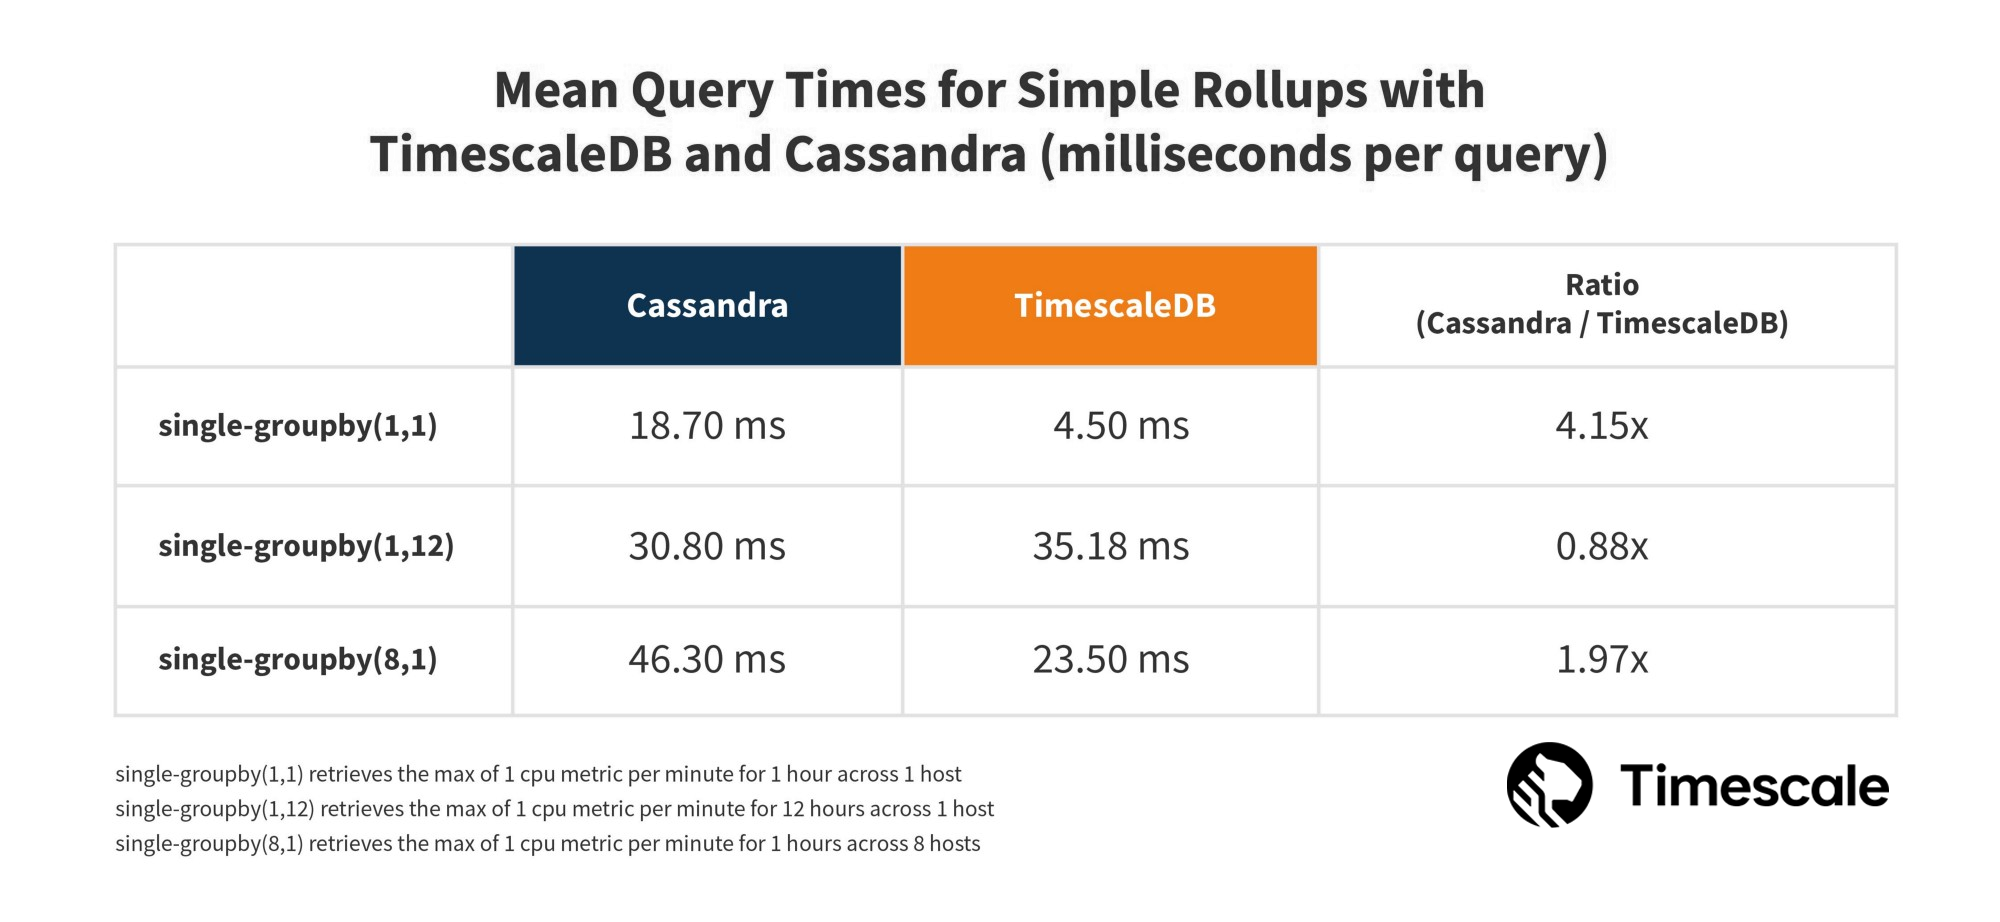 LOWER query times = BETTER performance